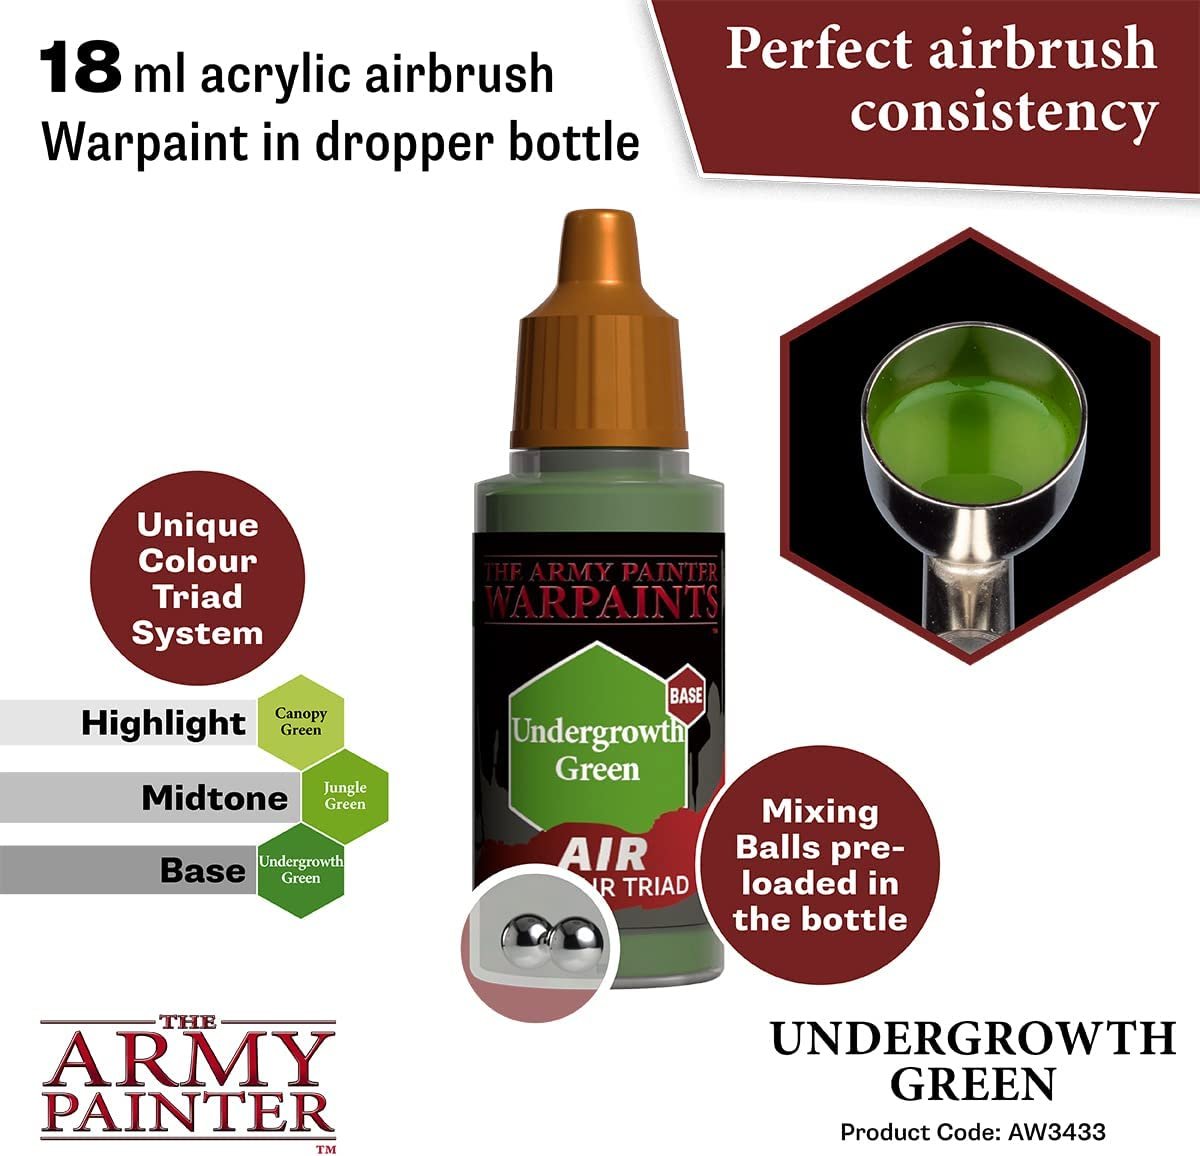 The Army Painter - Warpaints Air: Undergrowth Green (18ml/0.6oz)